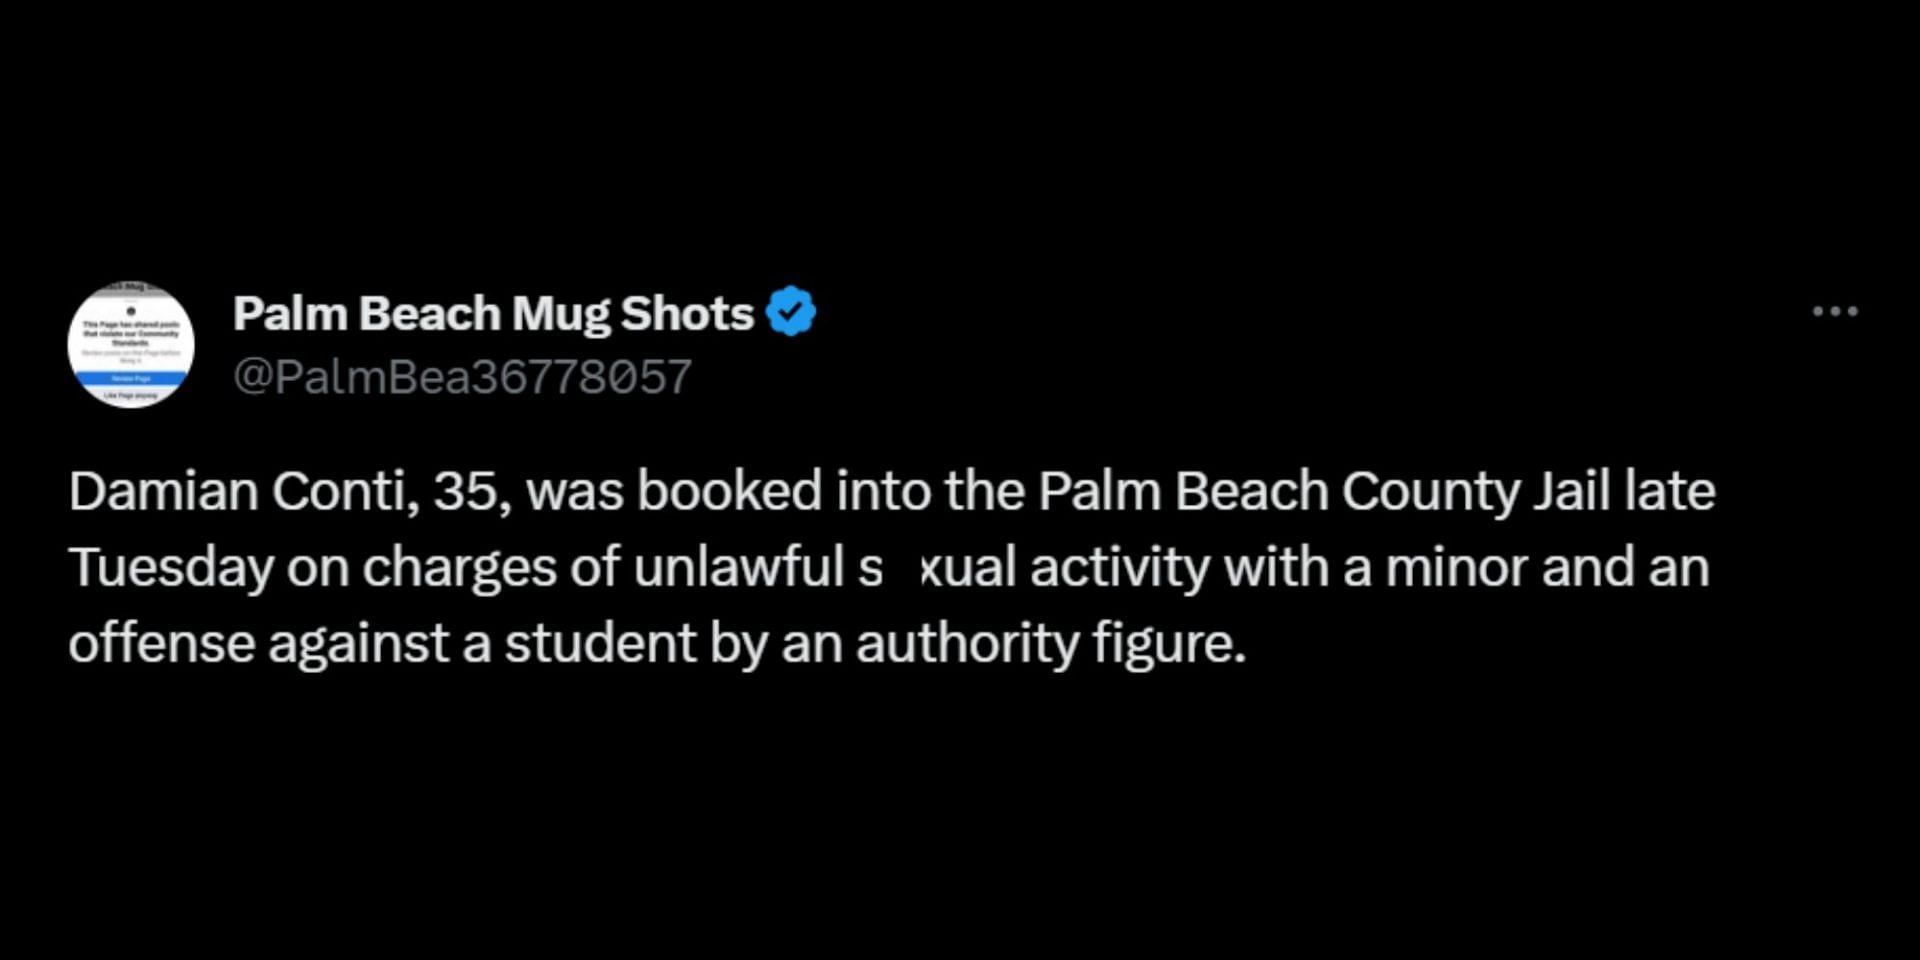 Conti was booked into Palm Beach County Jail. (Image via X/@@PalmBea36778057)